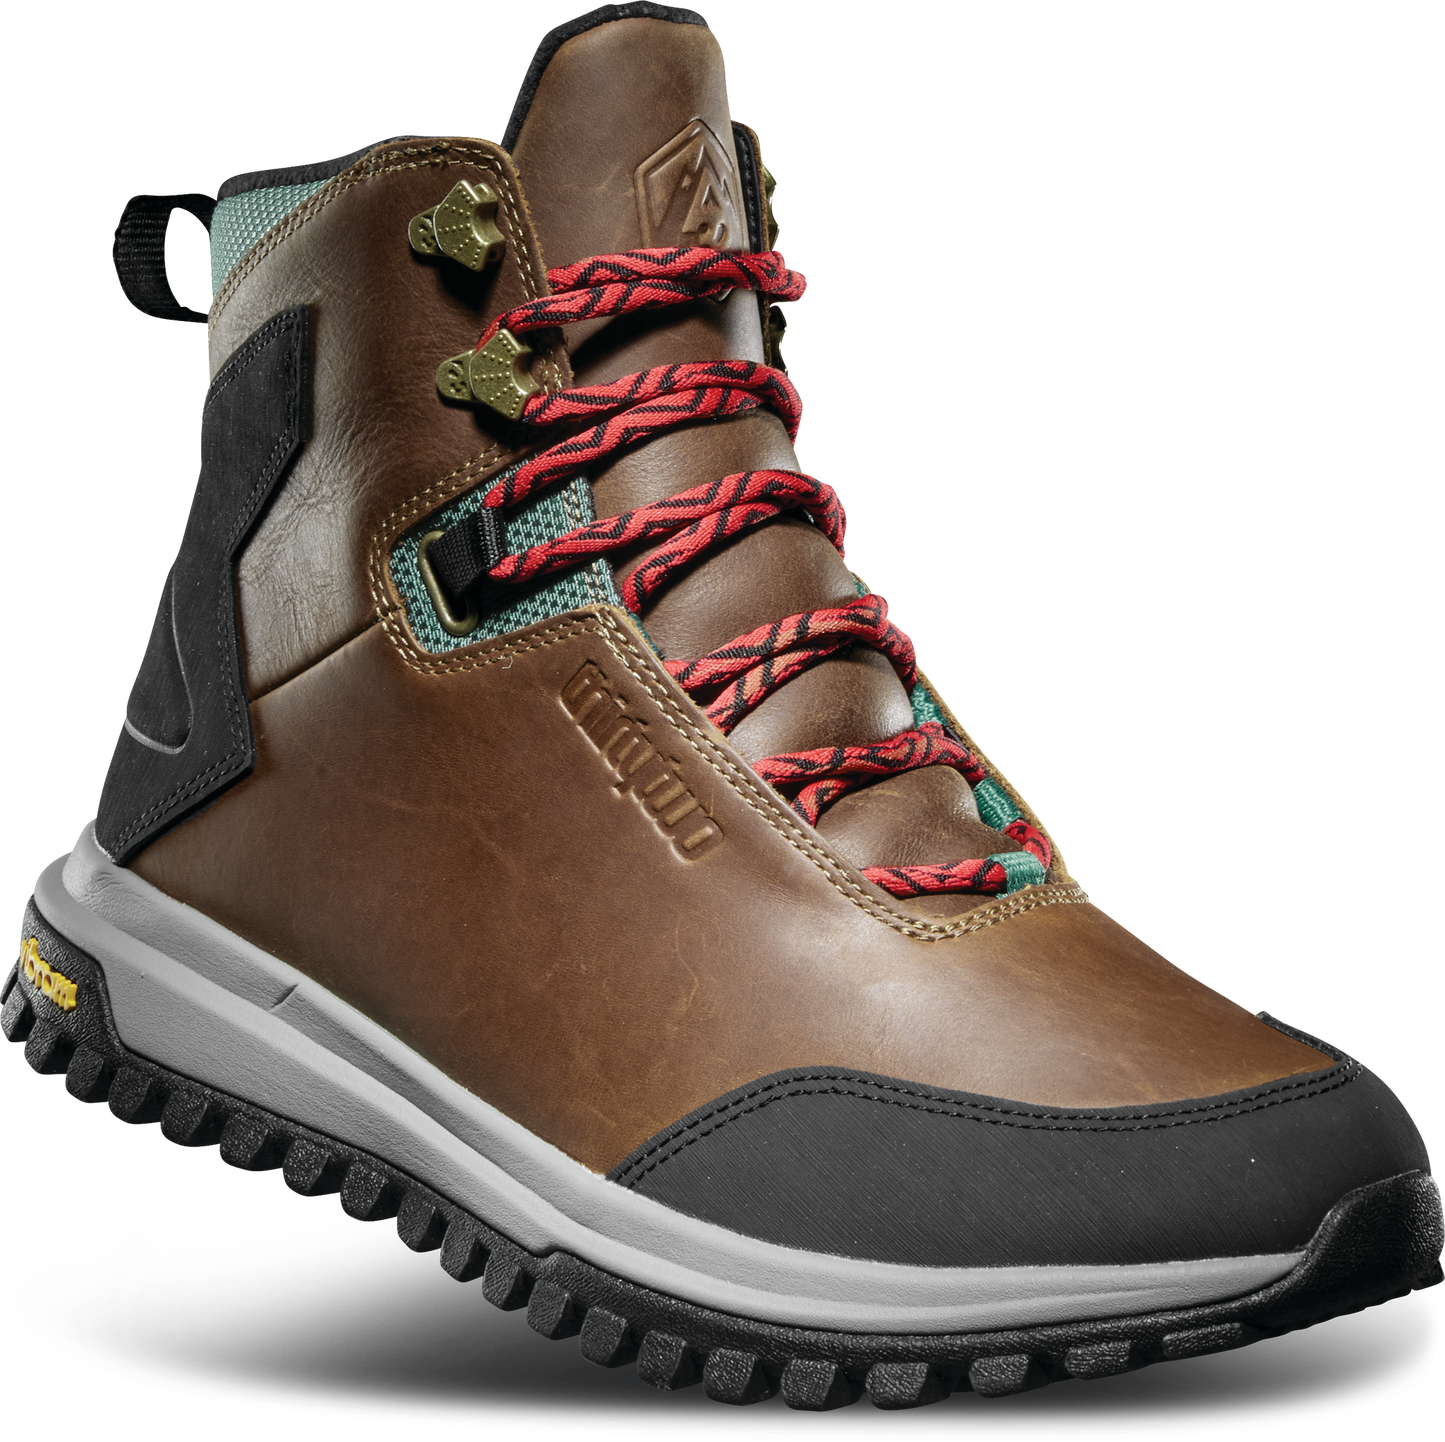 thirtytwo - Digger Boots